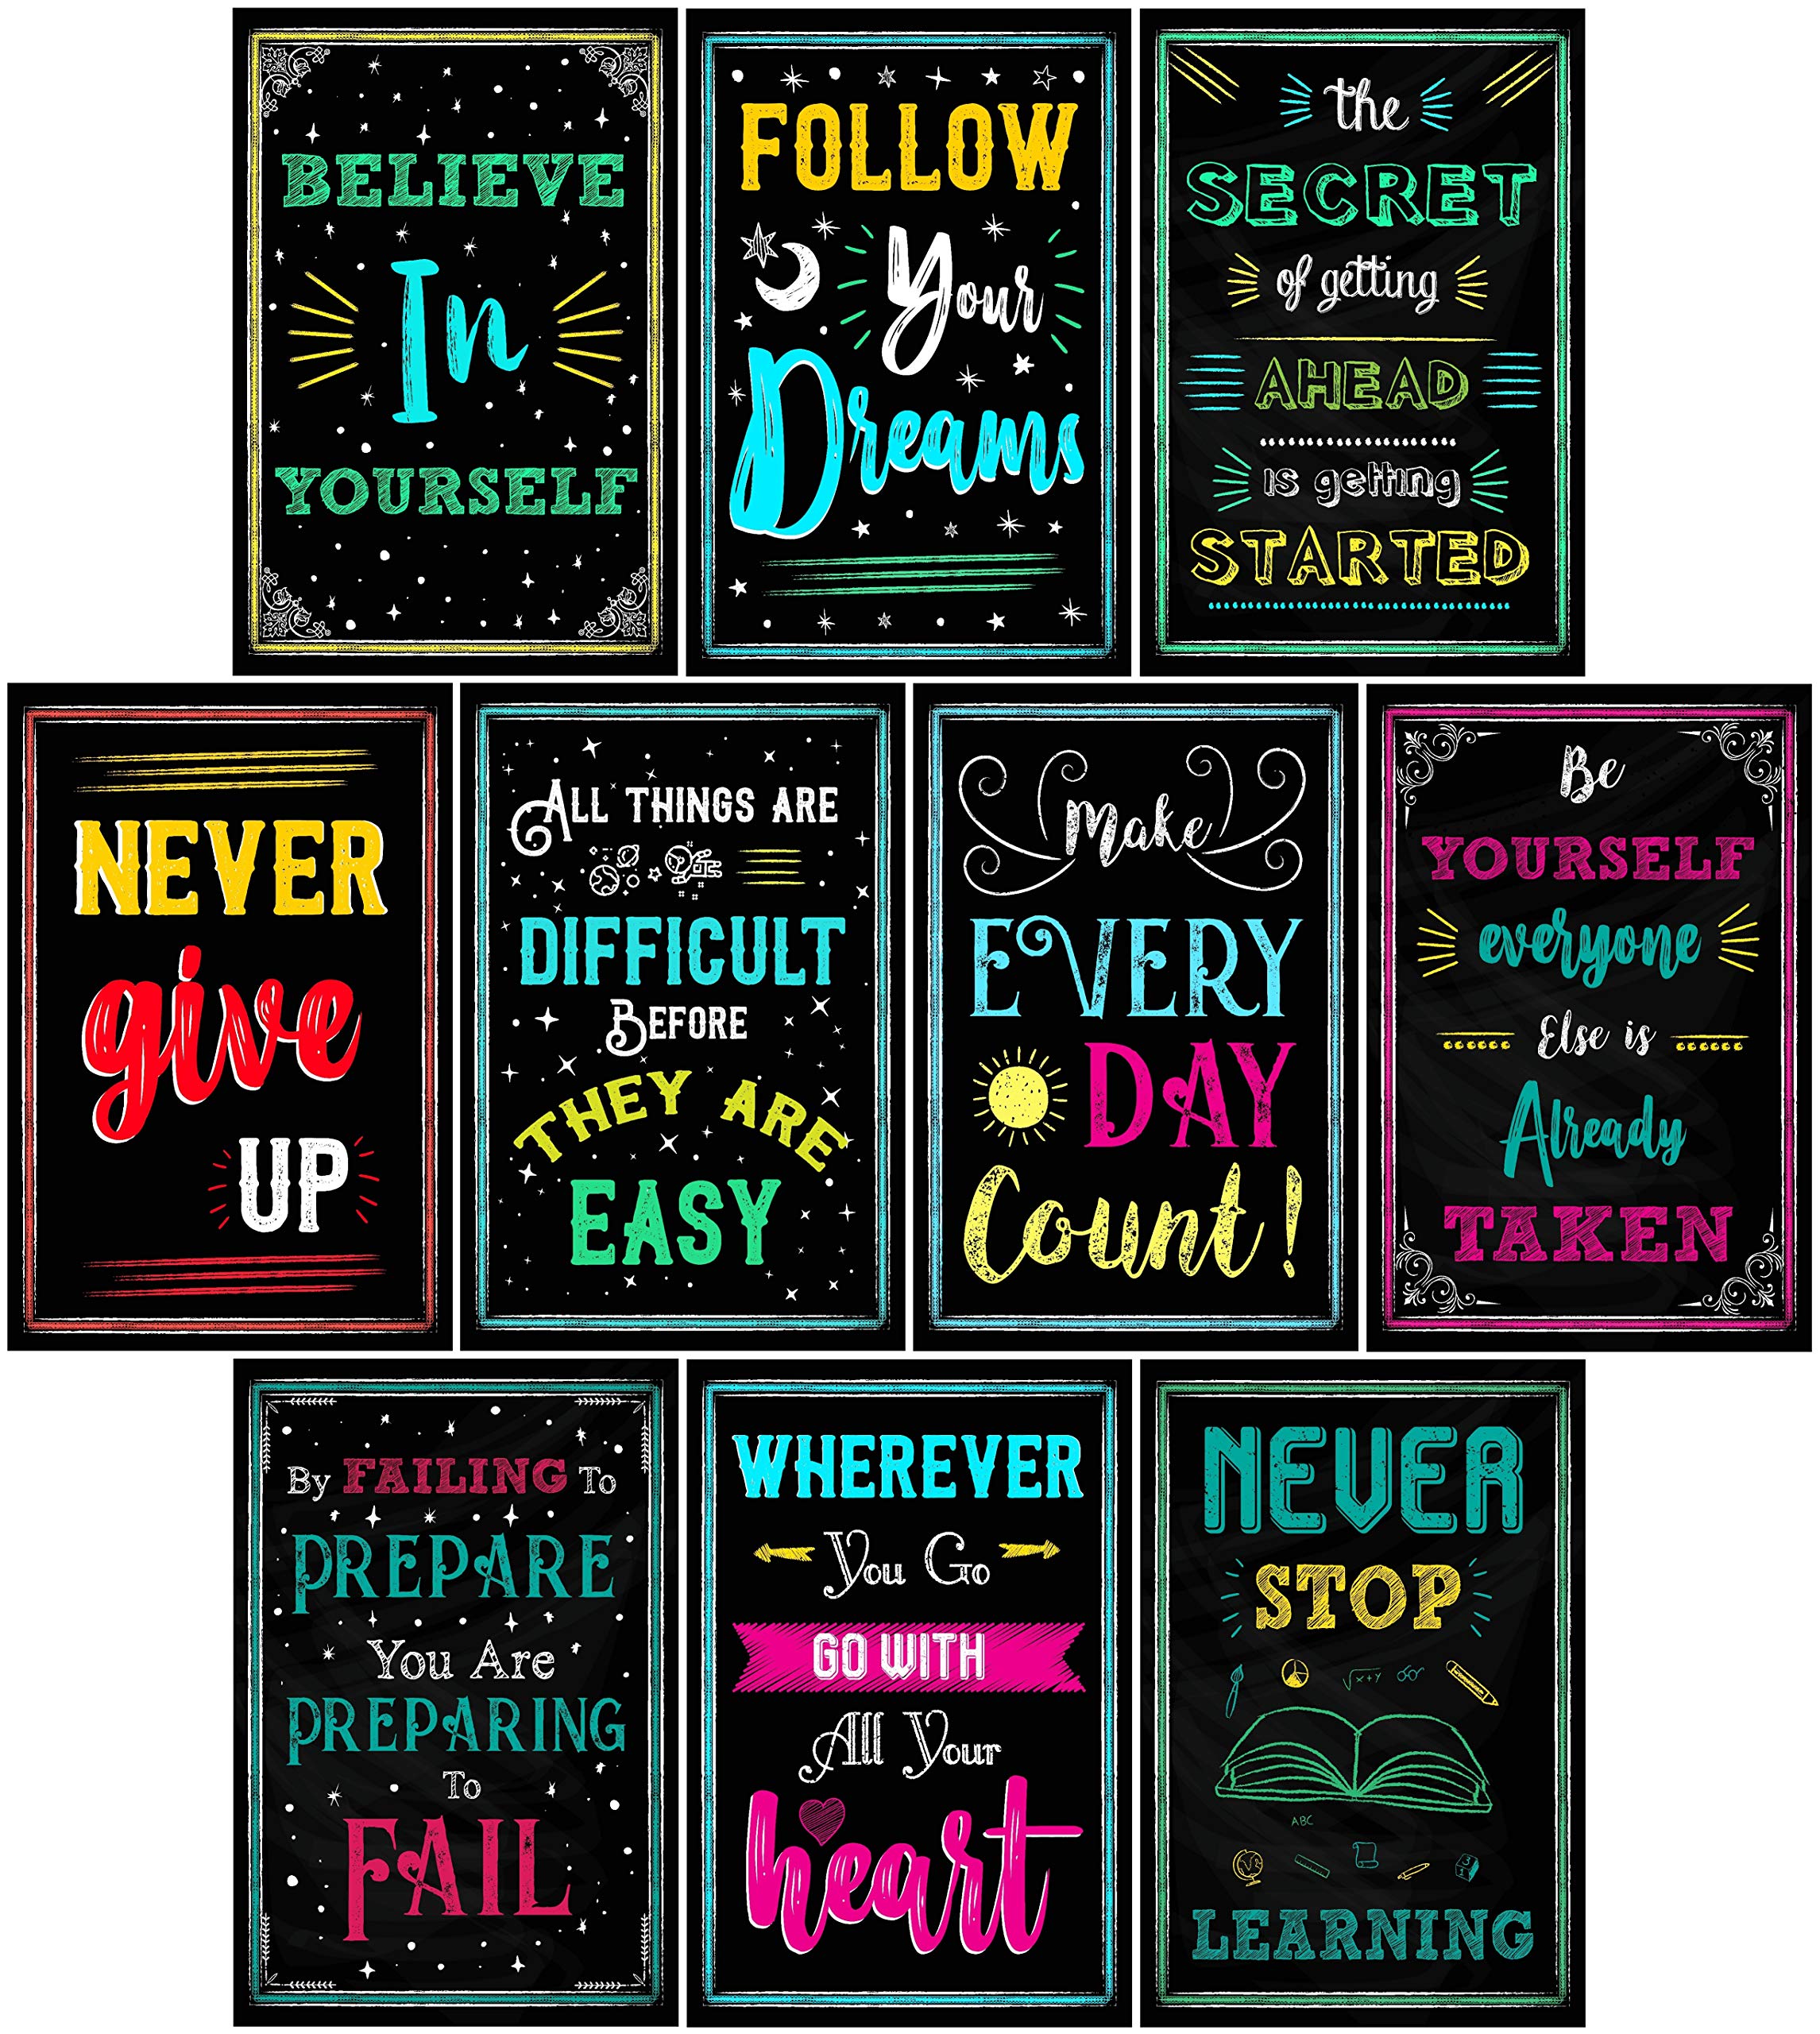 A chalkboard with motivational quotes.